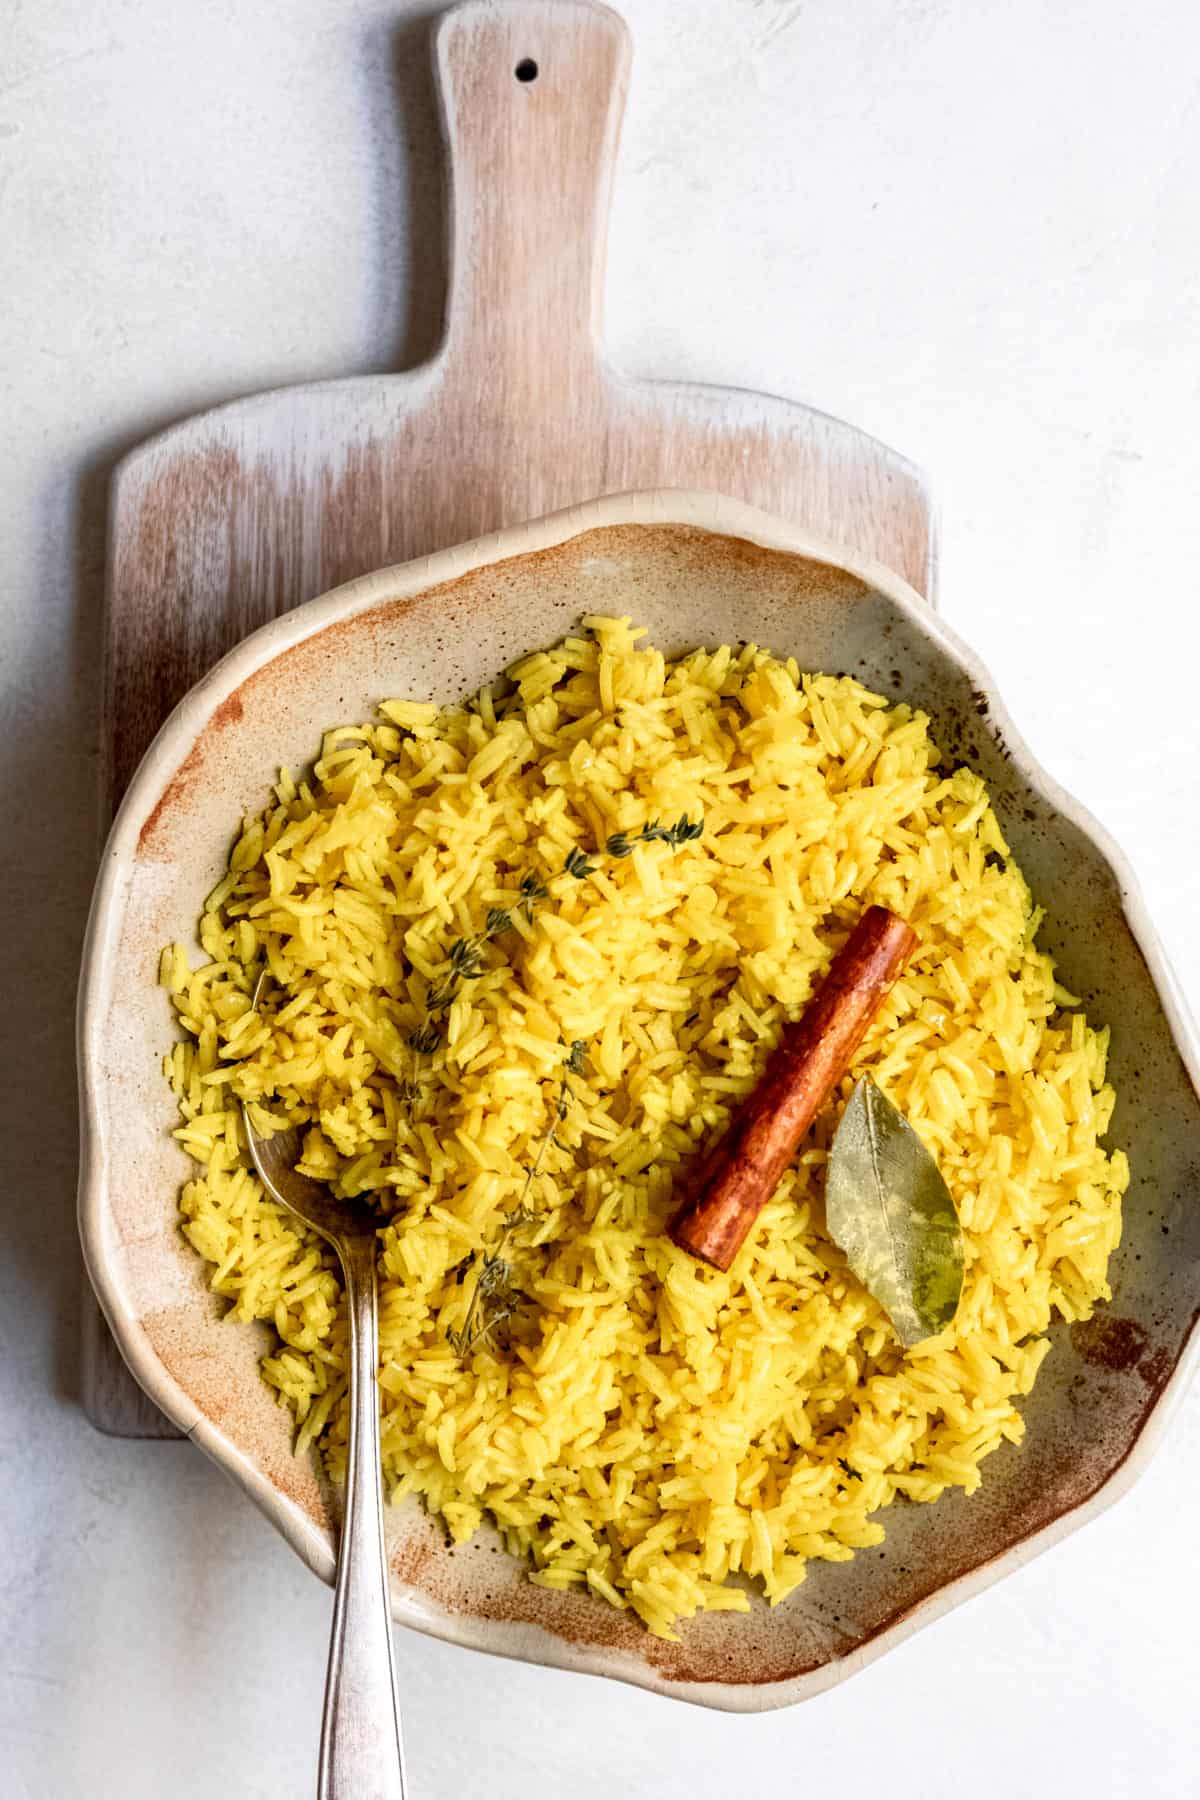 Golden pilau rice in a bowl.